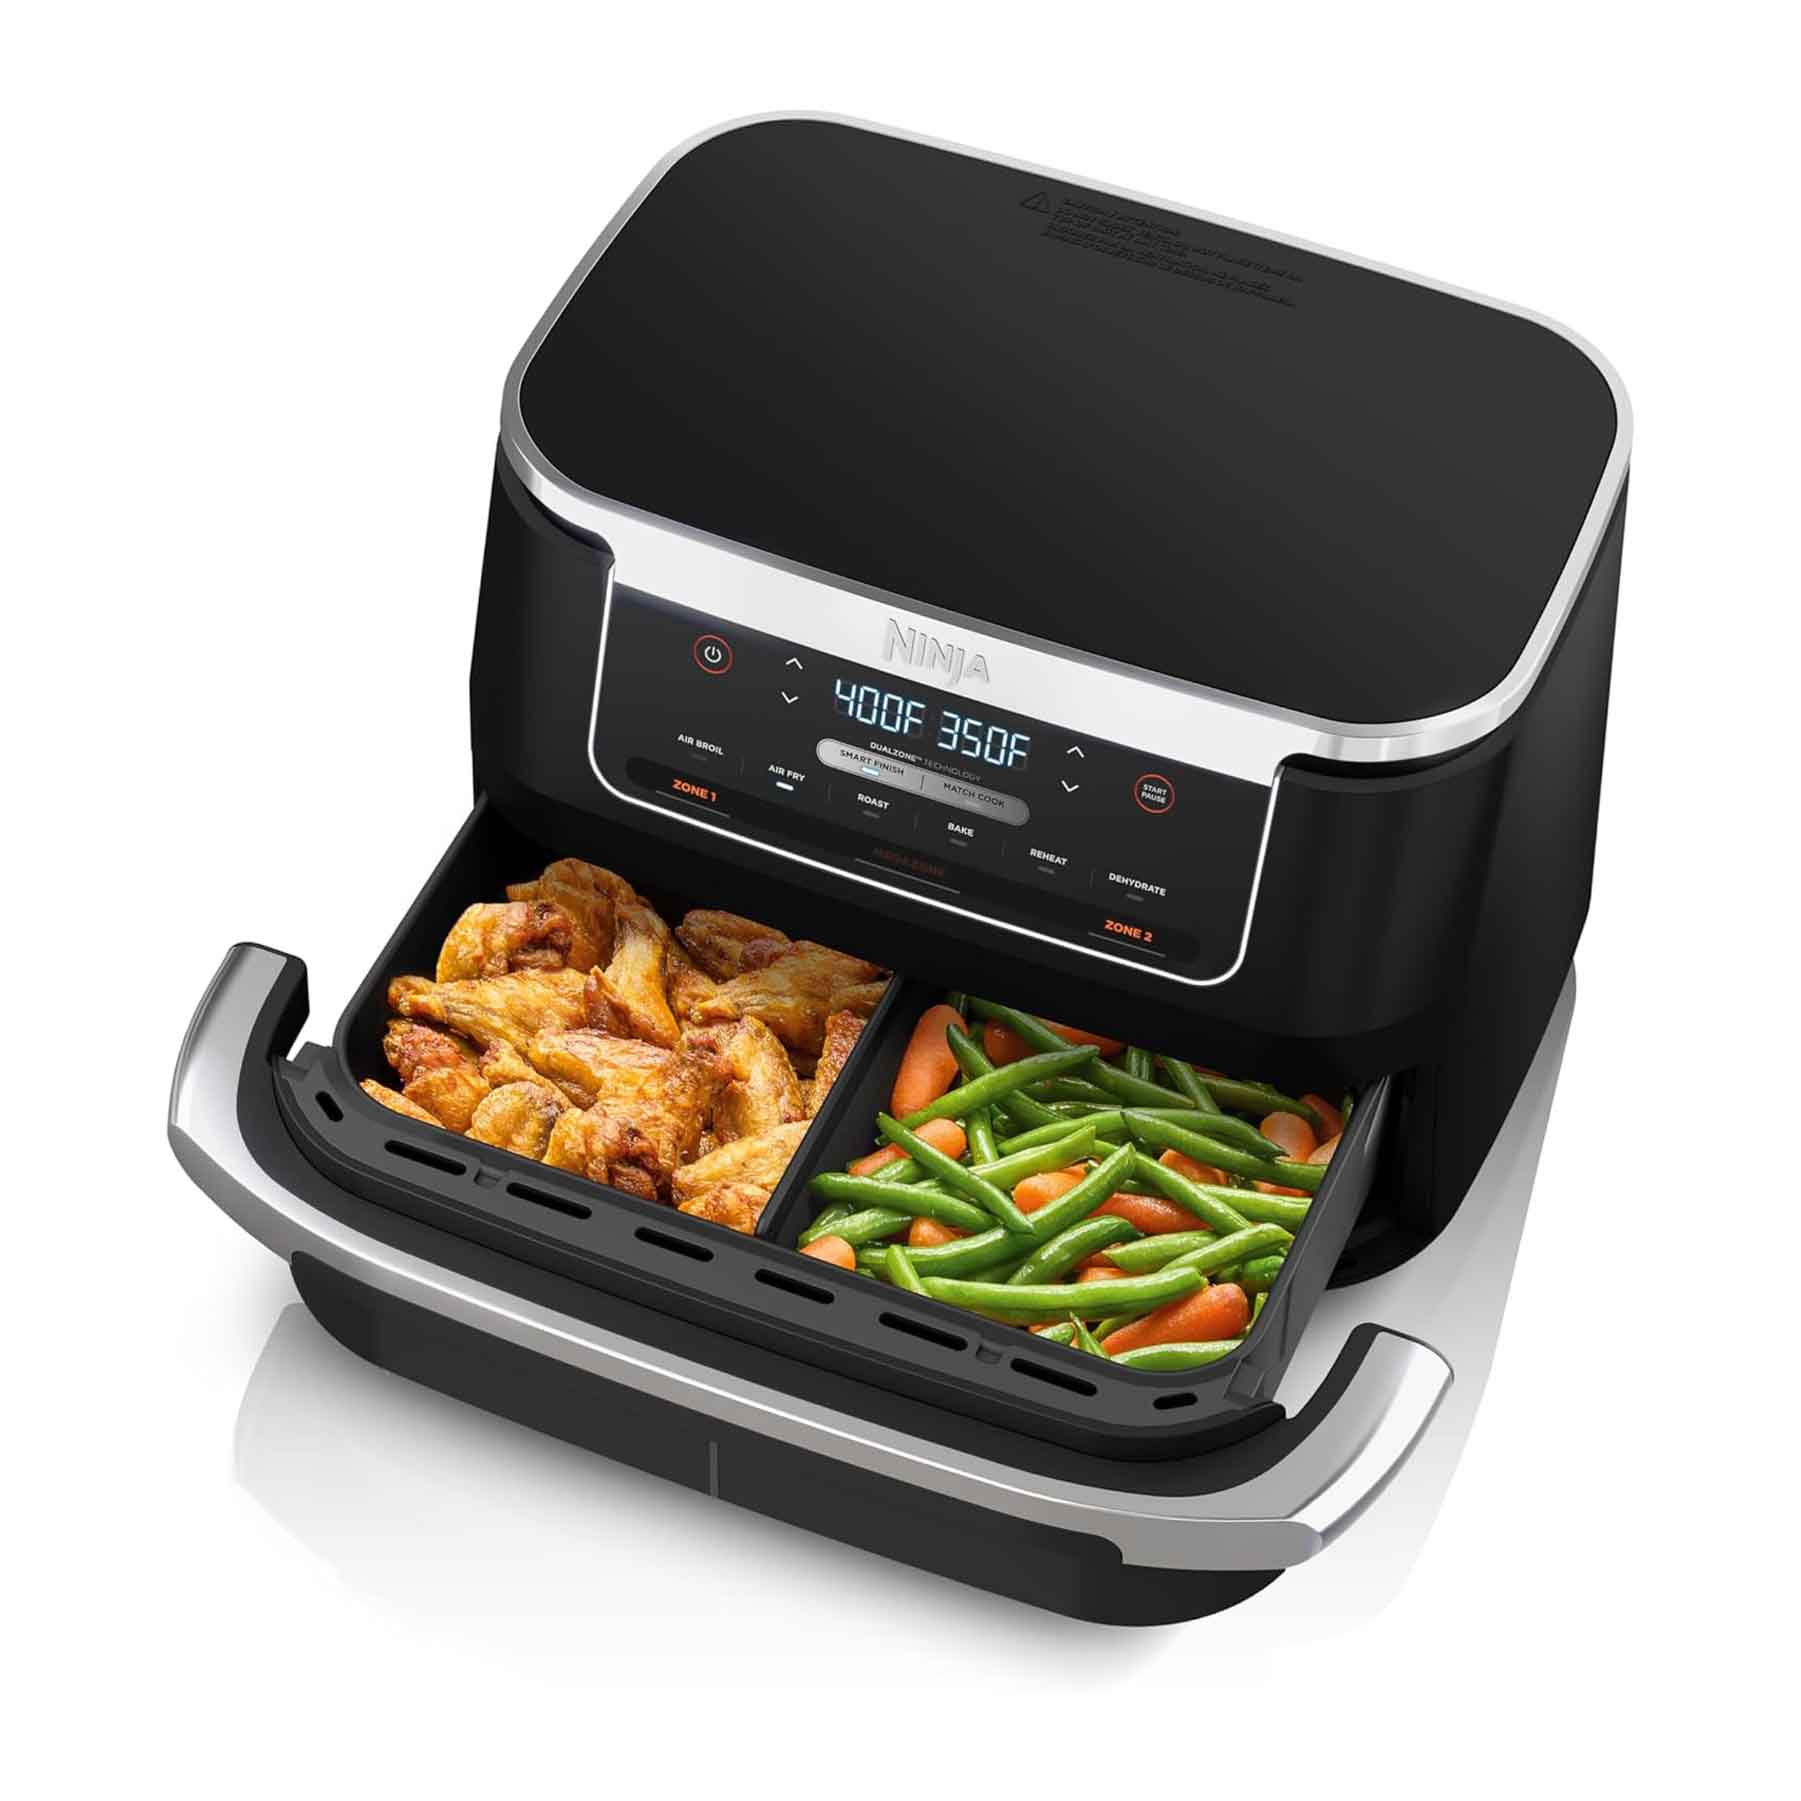 black Ninja Foodi air fryer with two baskets and an LED screen